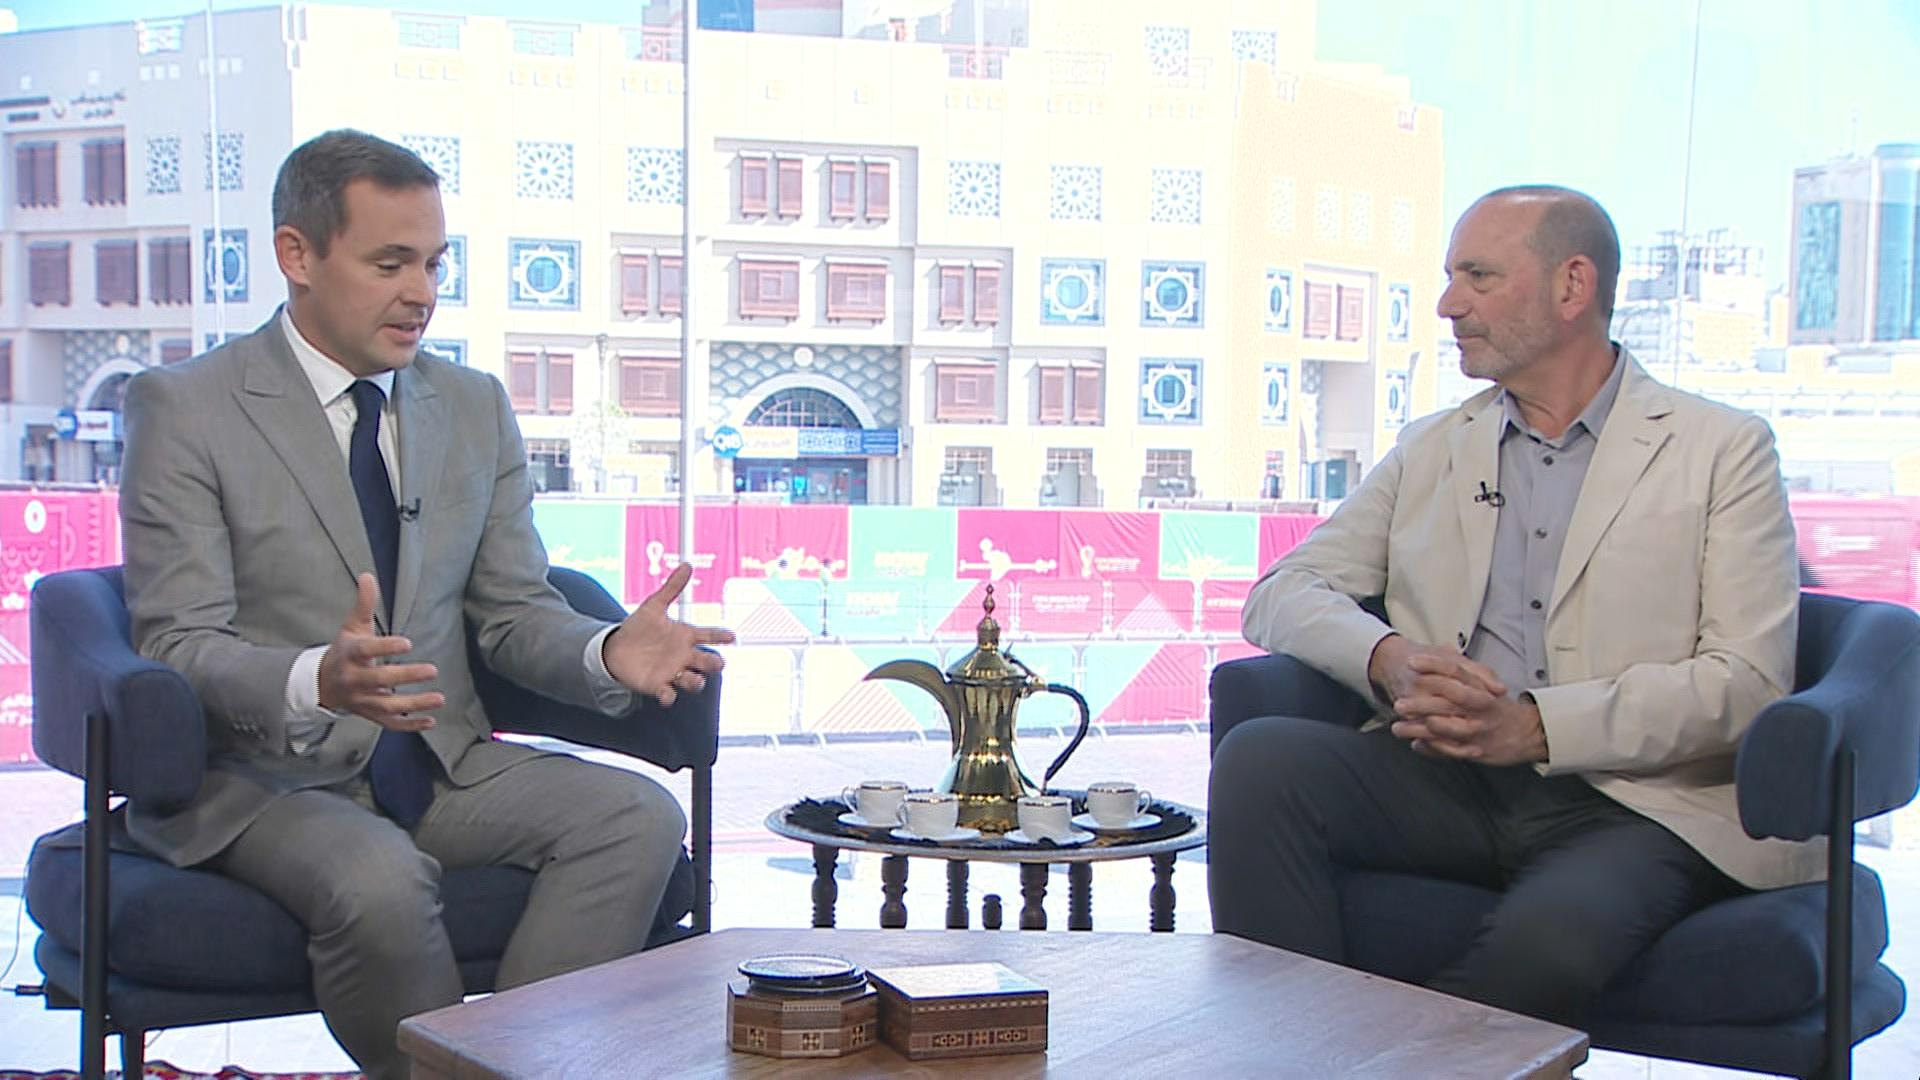 MLS commissioner Garber chats soccer's growth in Canada, MLS players at World Cup